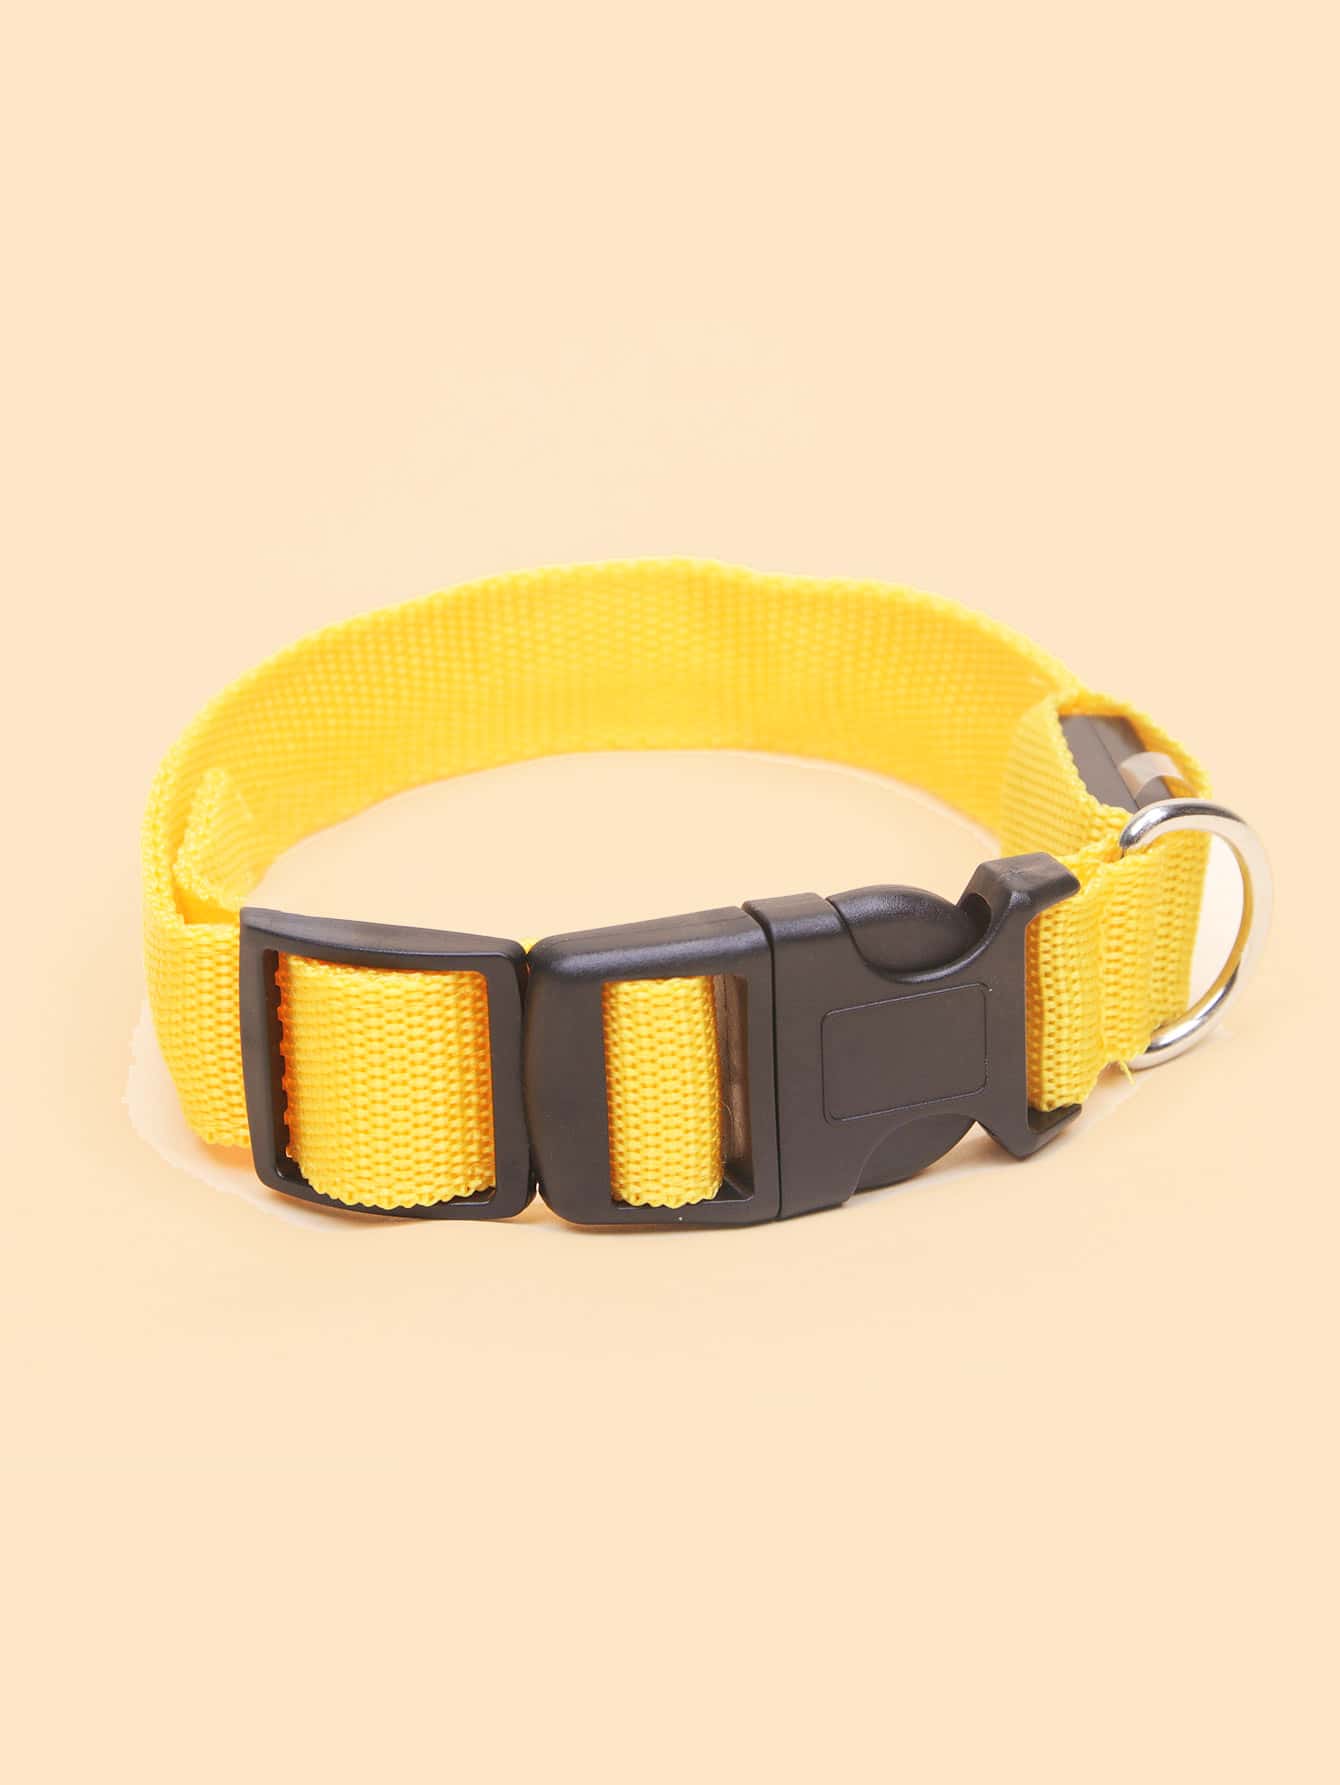 1pc LED Light Up Dog Collar For Night Safety Walking With Quick Snap Buckle Adjustable Comfortable Nylon Collar For Small Medium Large Dogs